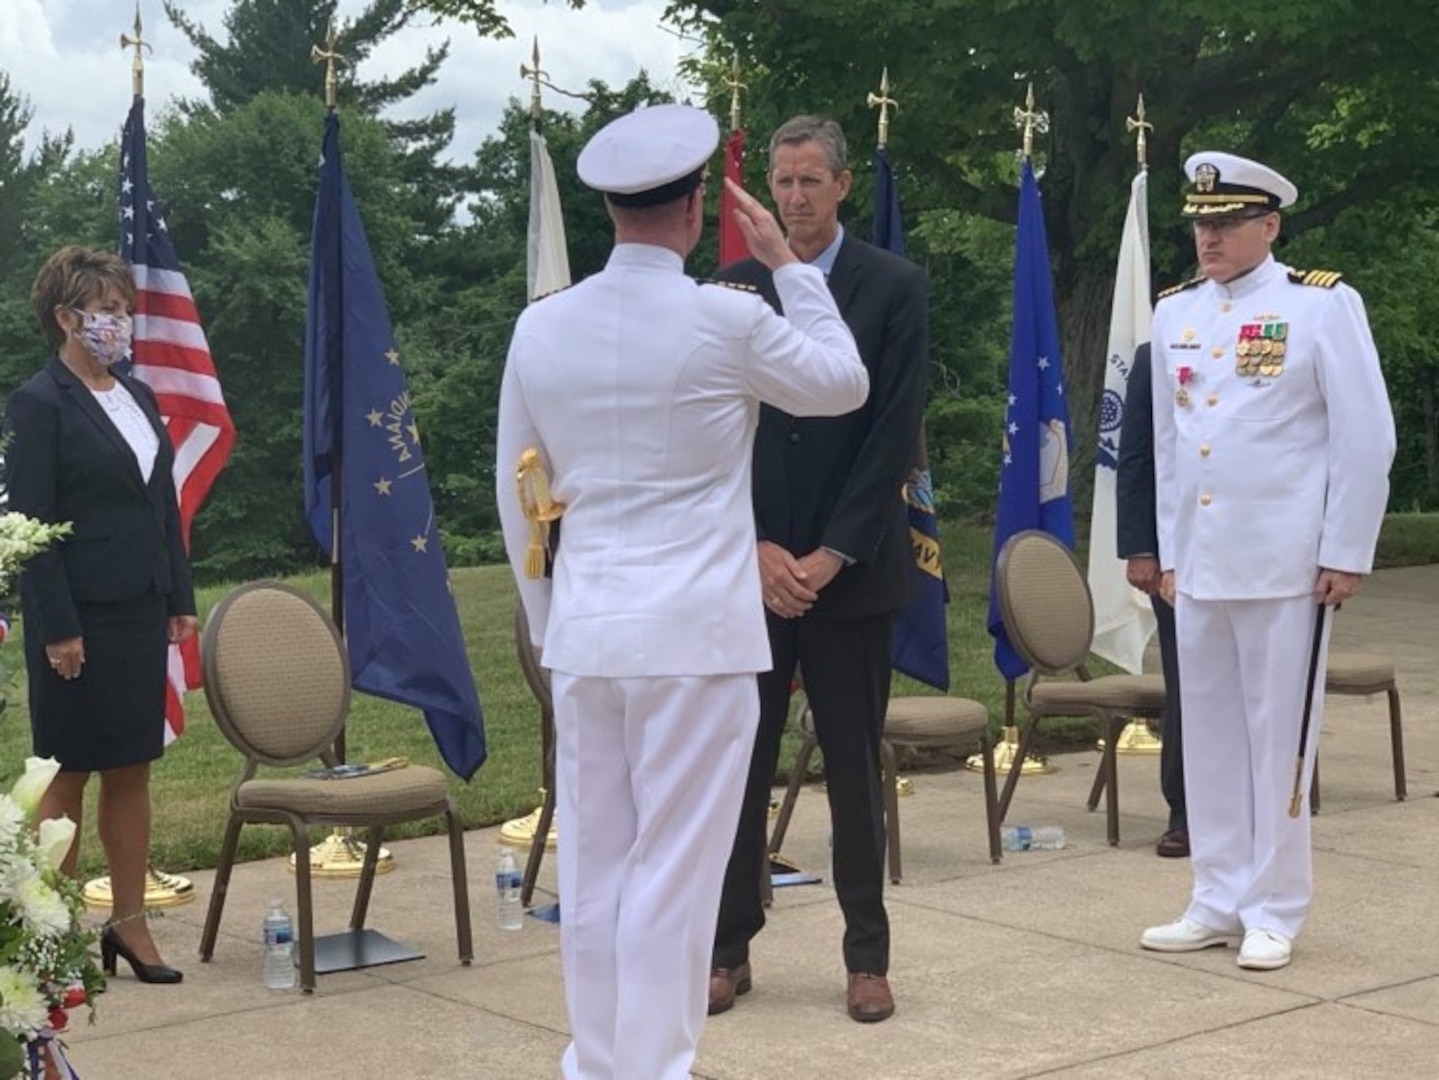 Captain Duncan McKay became the Commanding Officer (CO) of Naval Surface Warfare Center, Crane Division (NSWC Crane) in a ceremony at NSWC Crane on July 1, 2020. Left to right:  Ms. Tricia Herndon, NSWC Crane Technical Director (Acting); CAPT Duncan McKay, NSWC Crane Commanding Officer; Dr. Brett Seidle, Executive Director, NAVSEA Warfare Centers; and CAPT Mark Oesterreich, Former NSWC Crane Commanding Officer.